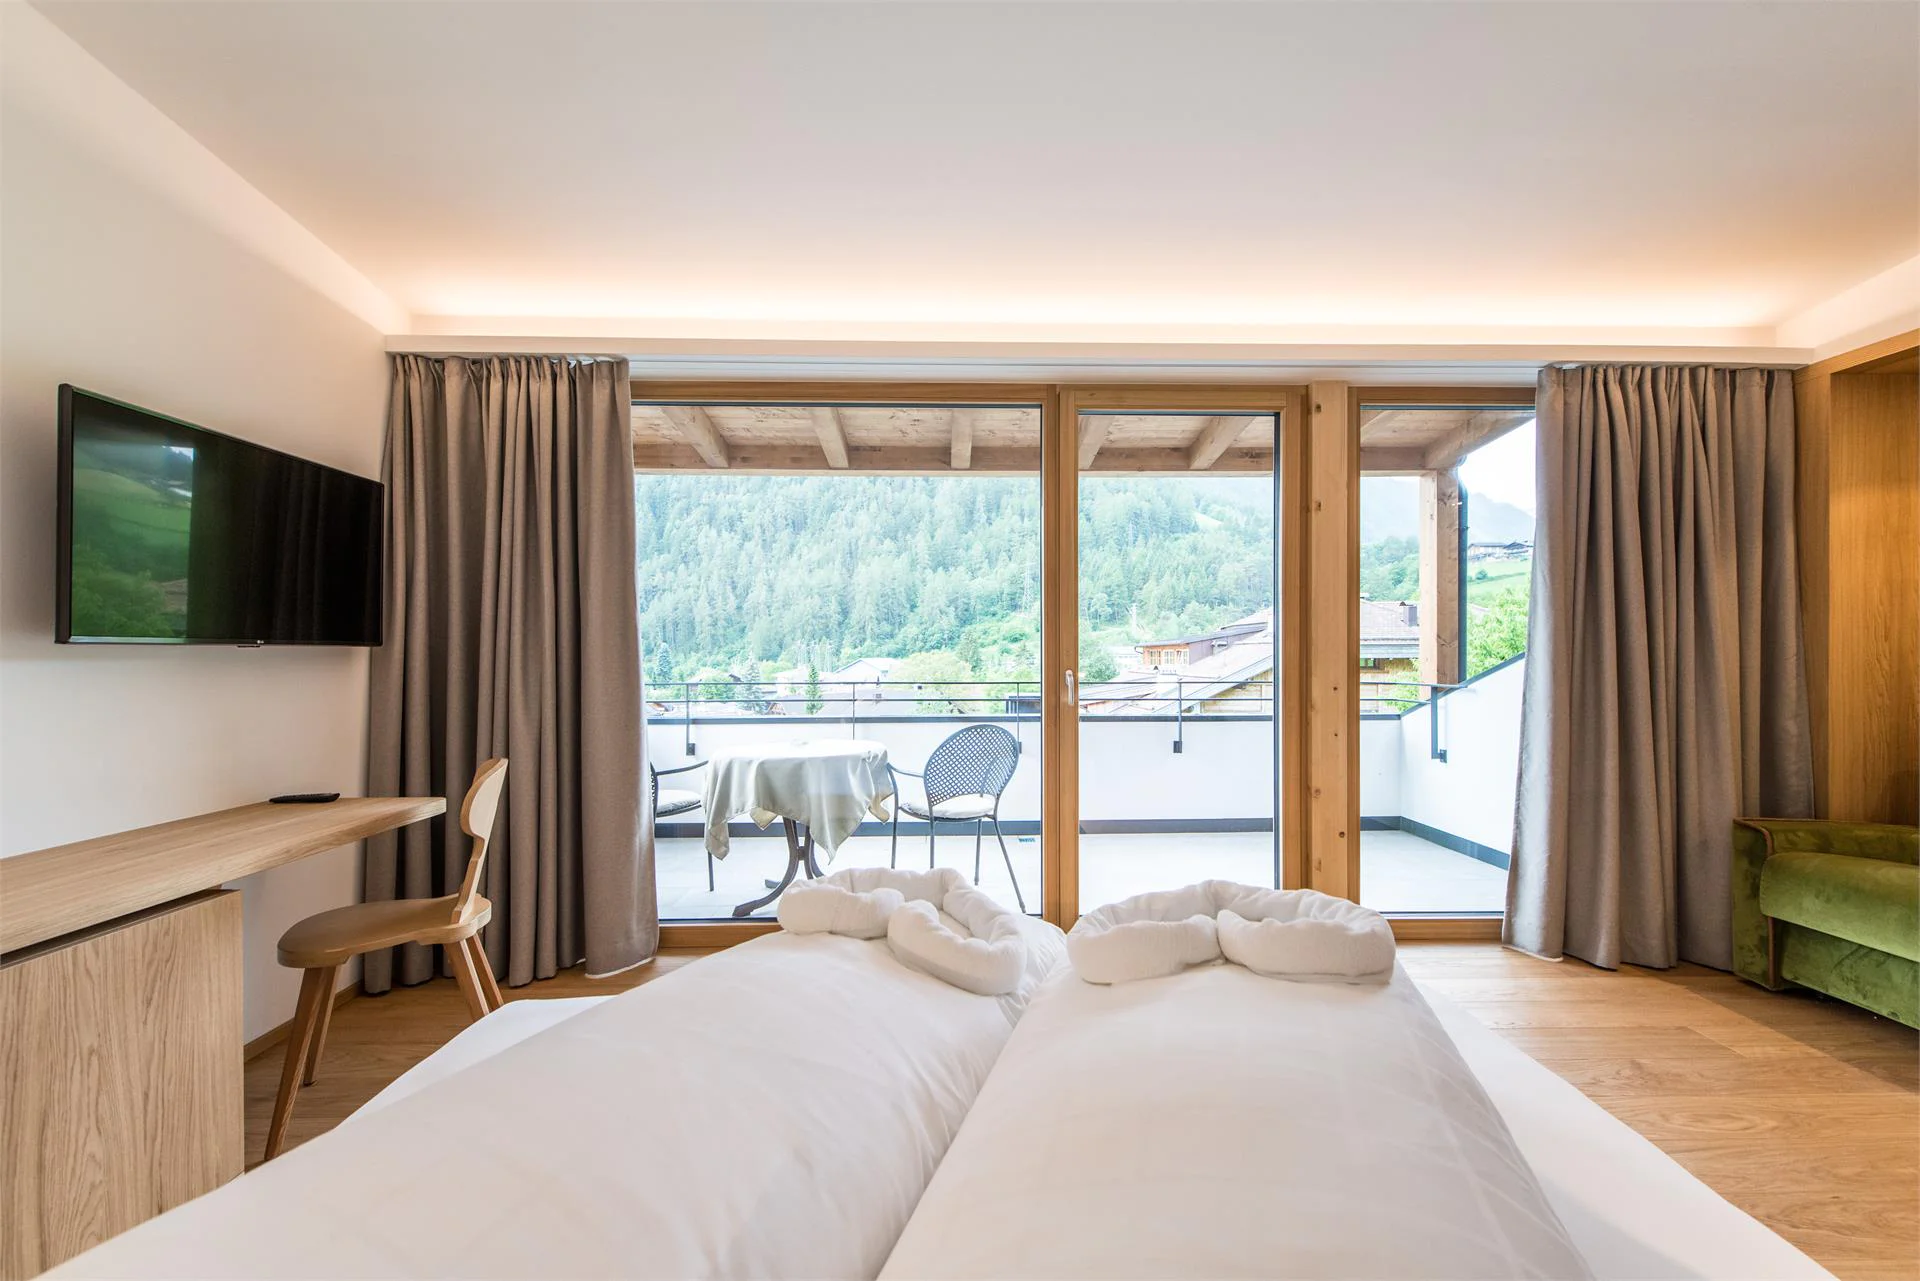 Hotel Taufers Campo Tures 14 suedtirol.info